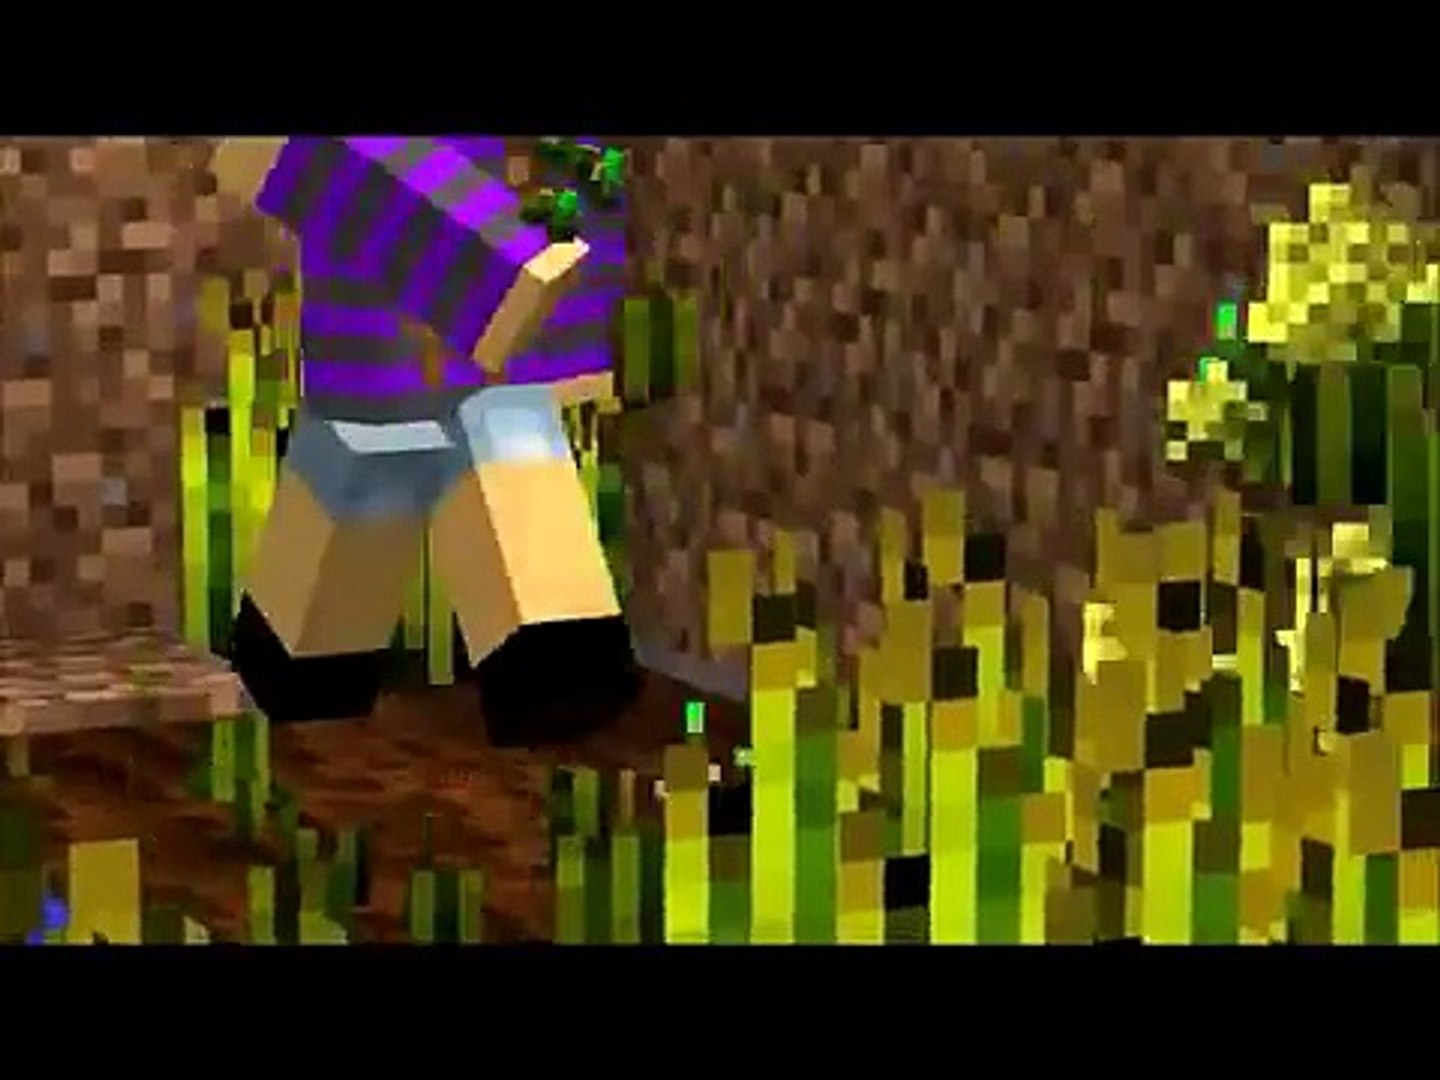 ♪ Top 10 Minecraft Songs - 2014 february Best Animated Minecraft Music Video's ever